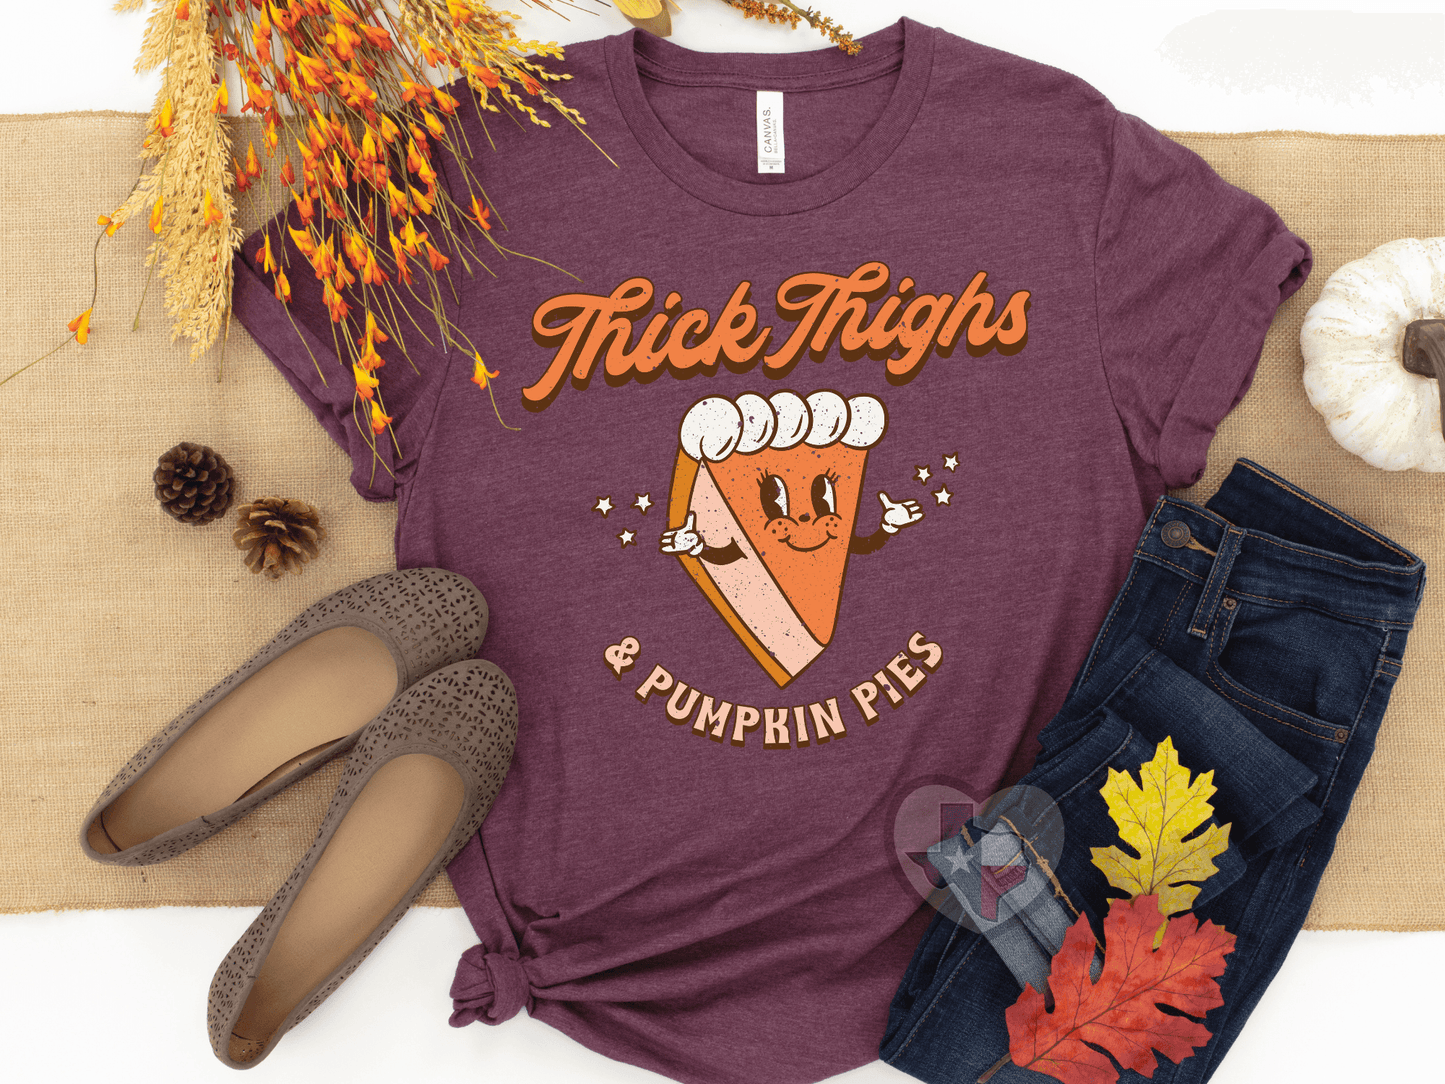 Thick Thighs/Pumpkin Pies DTF